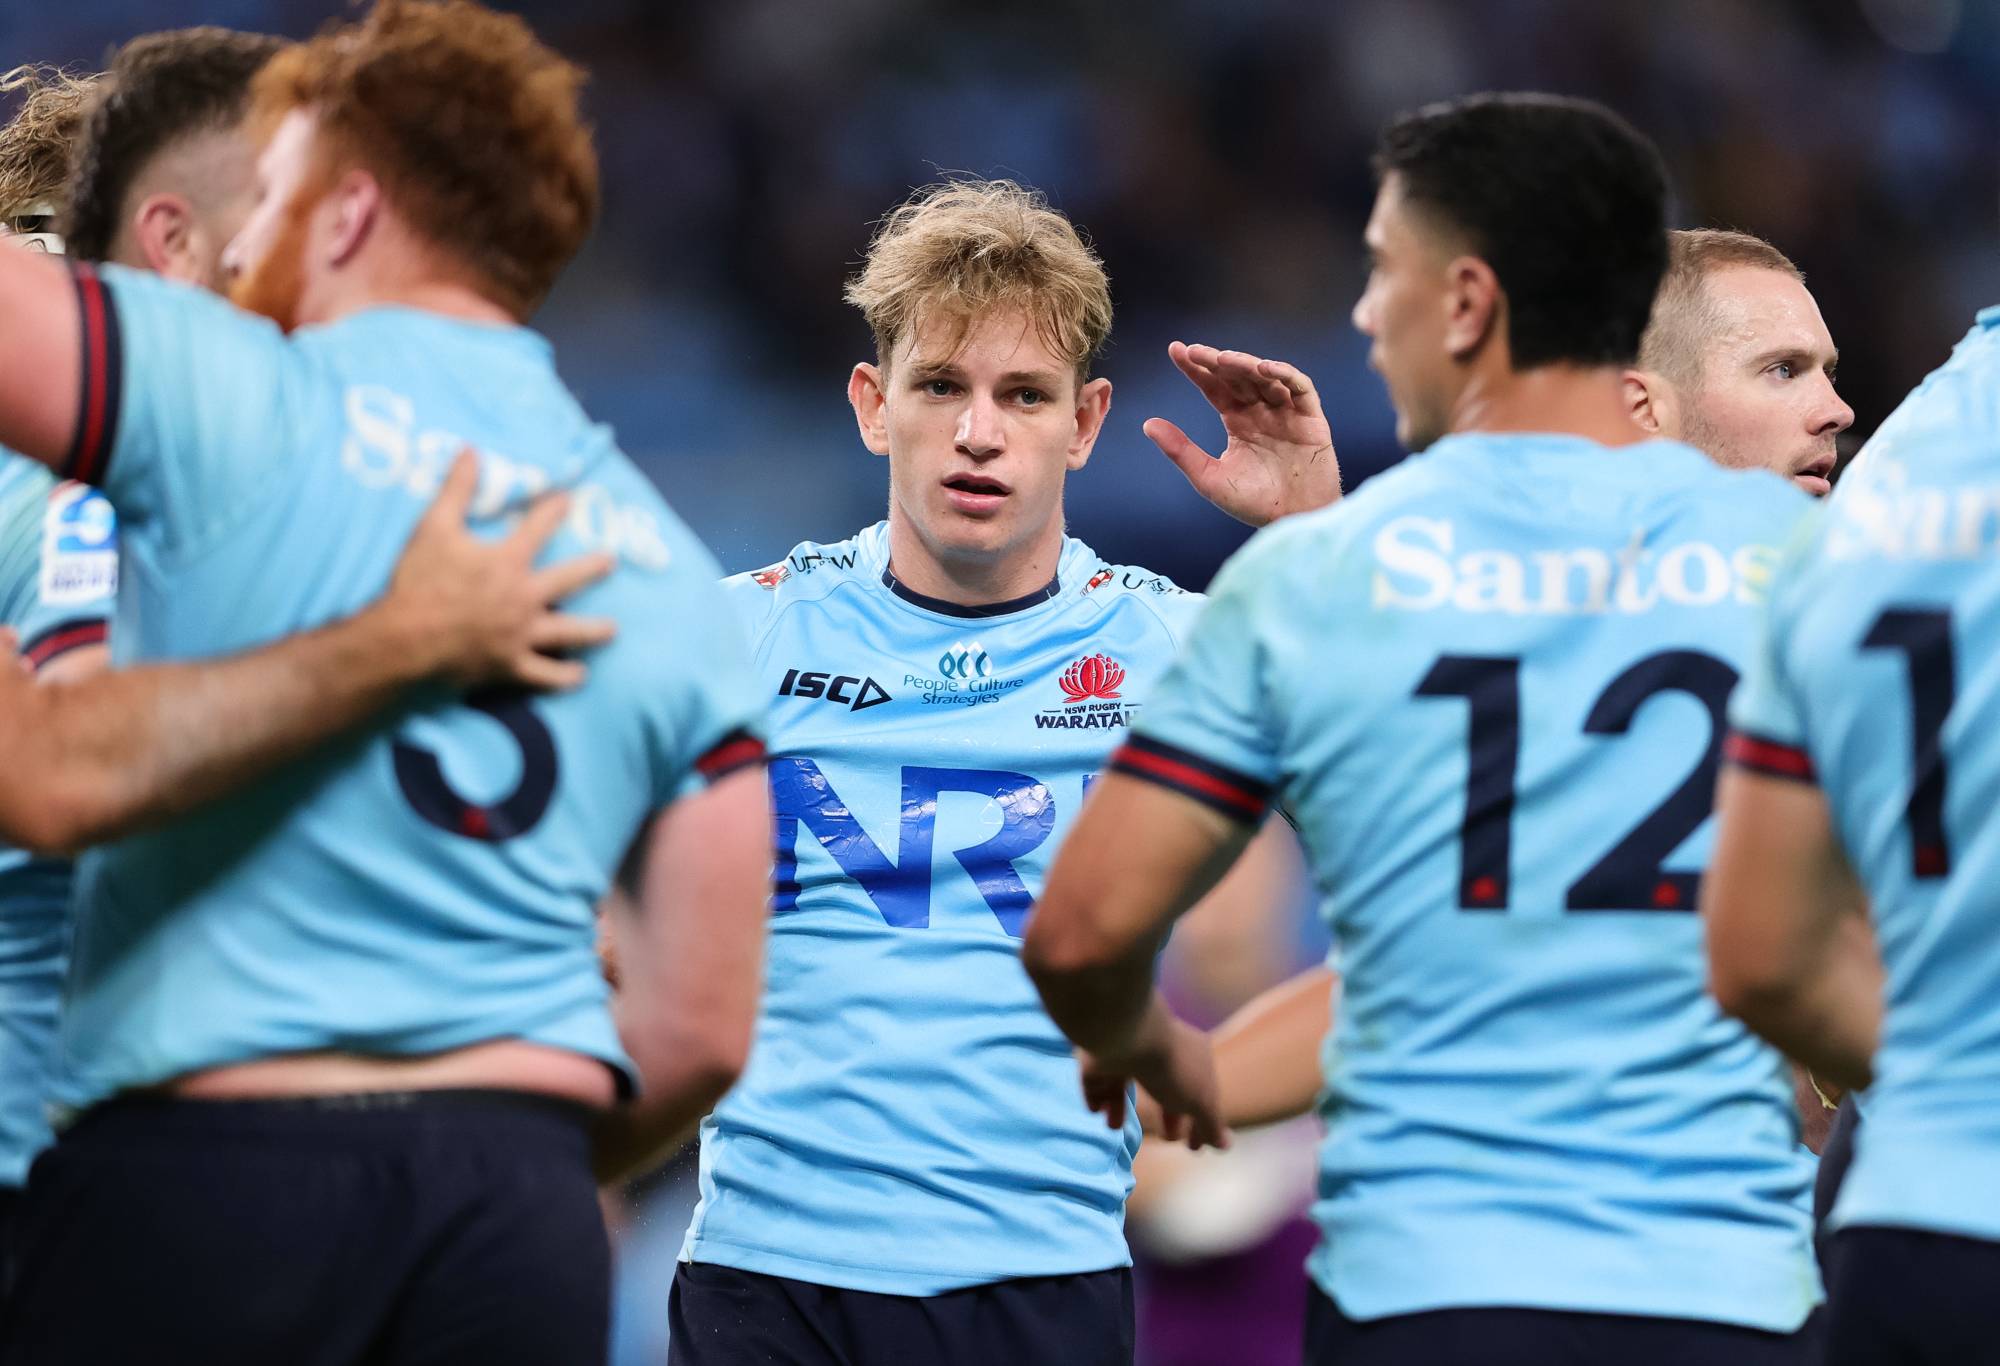 Jorgo injury adds to Tahs’ pain as DC forced to turn to club land to cover FOURTH season-ending hooker blow